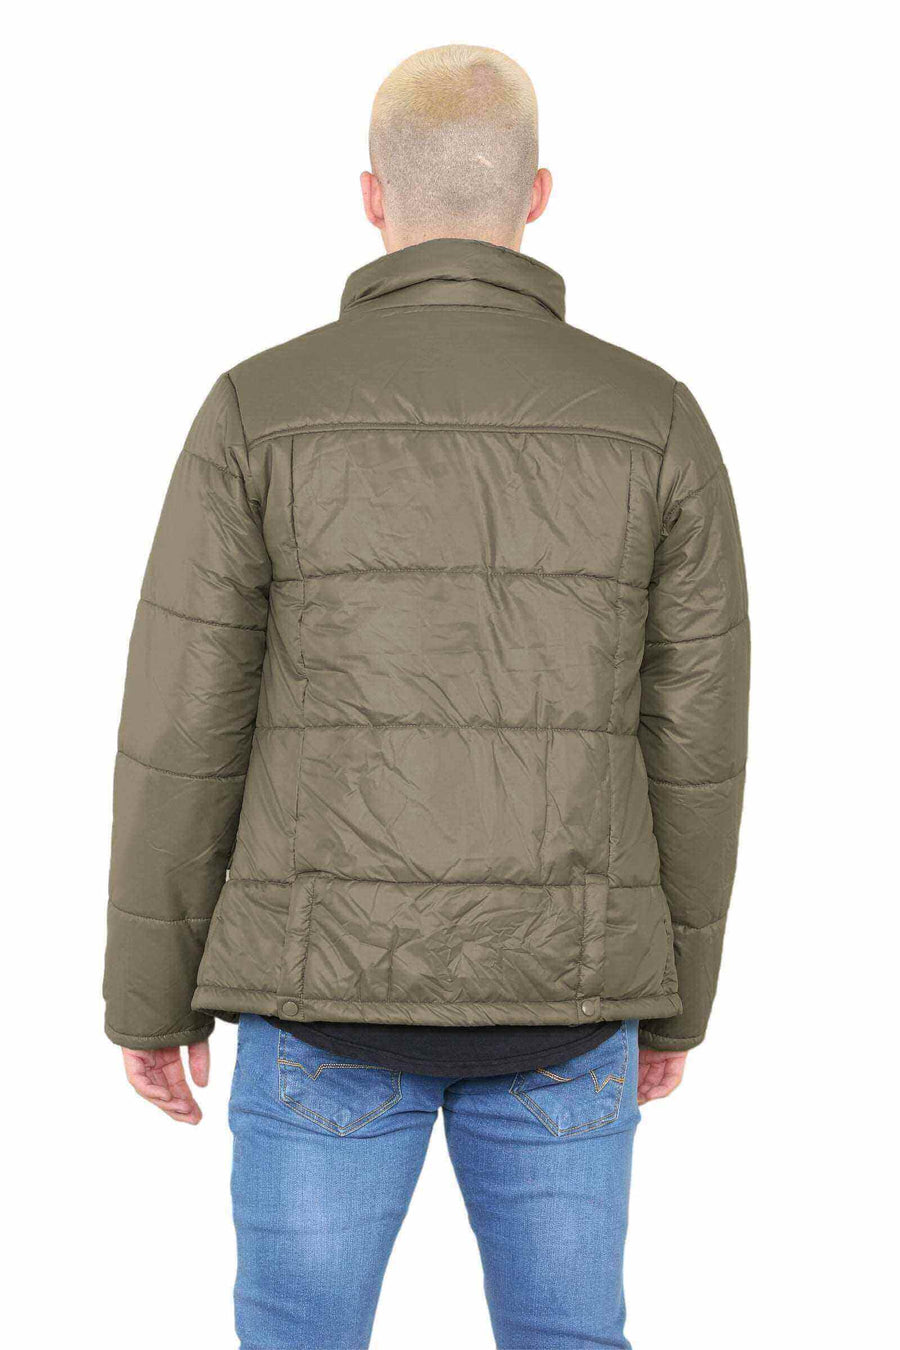 Back View of Mens Puffer Jacket in Olive